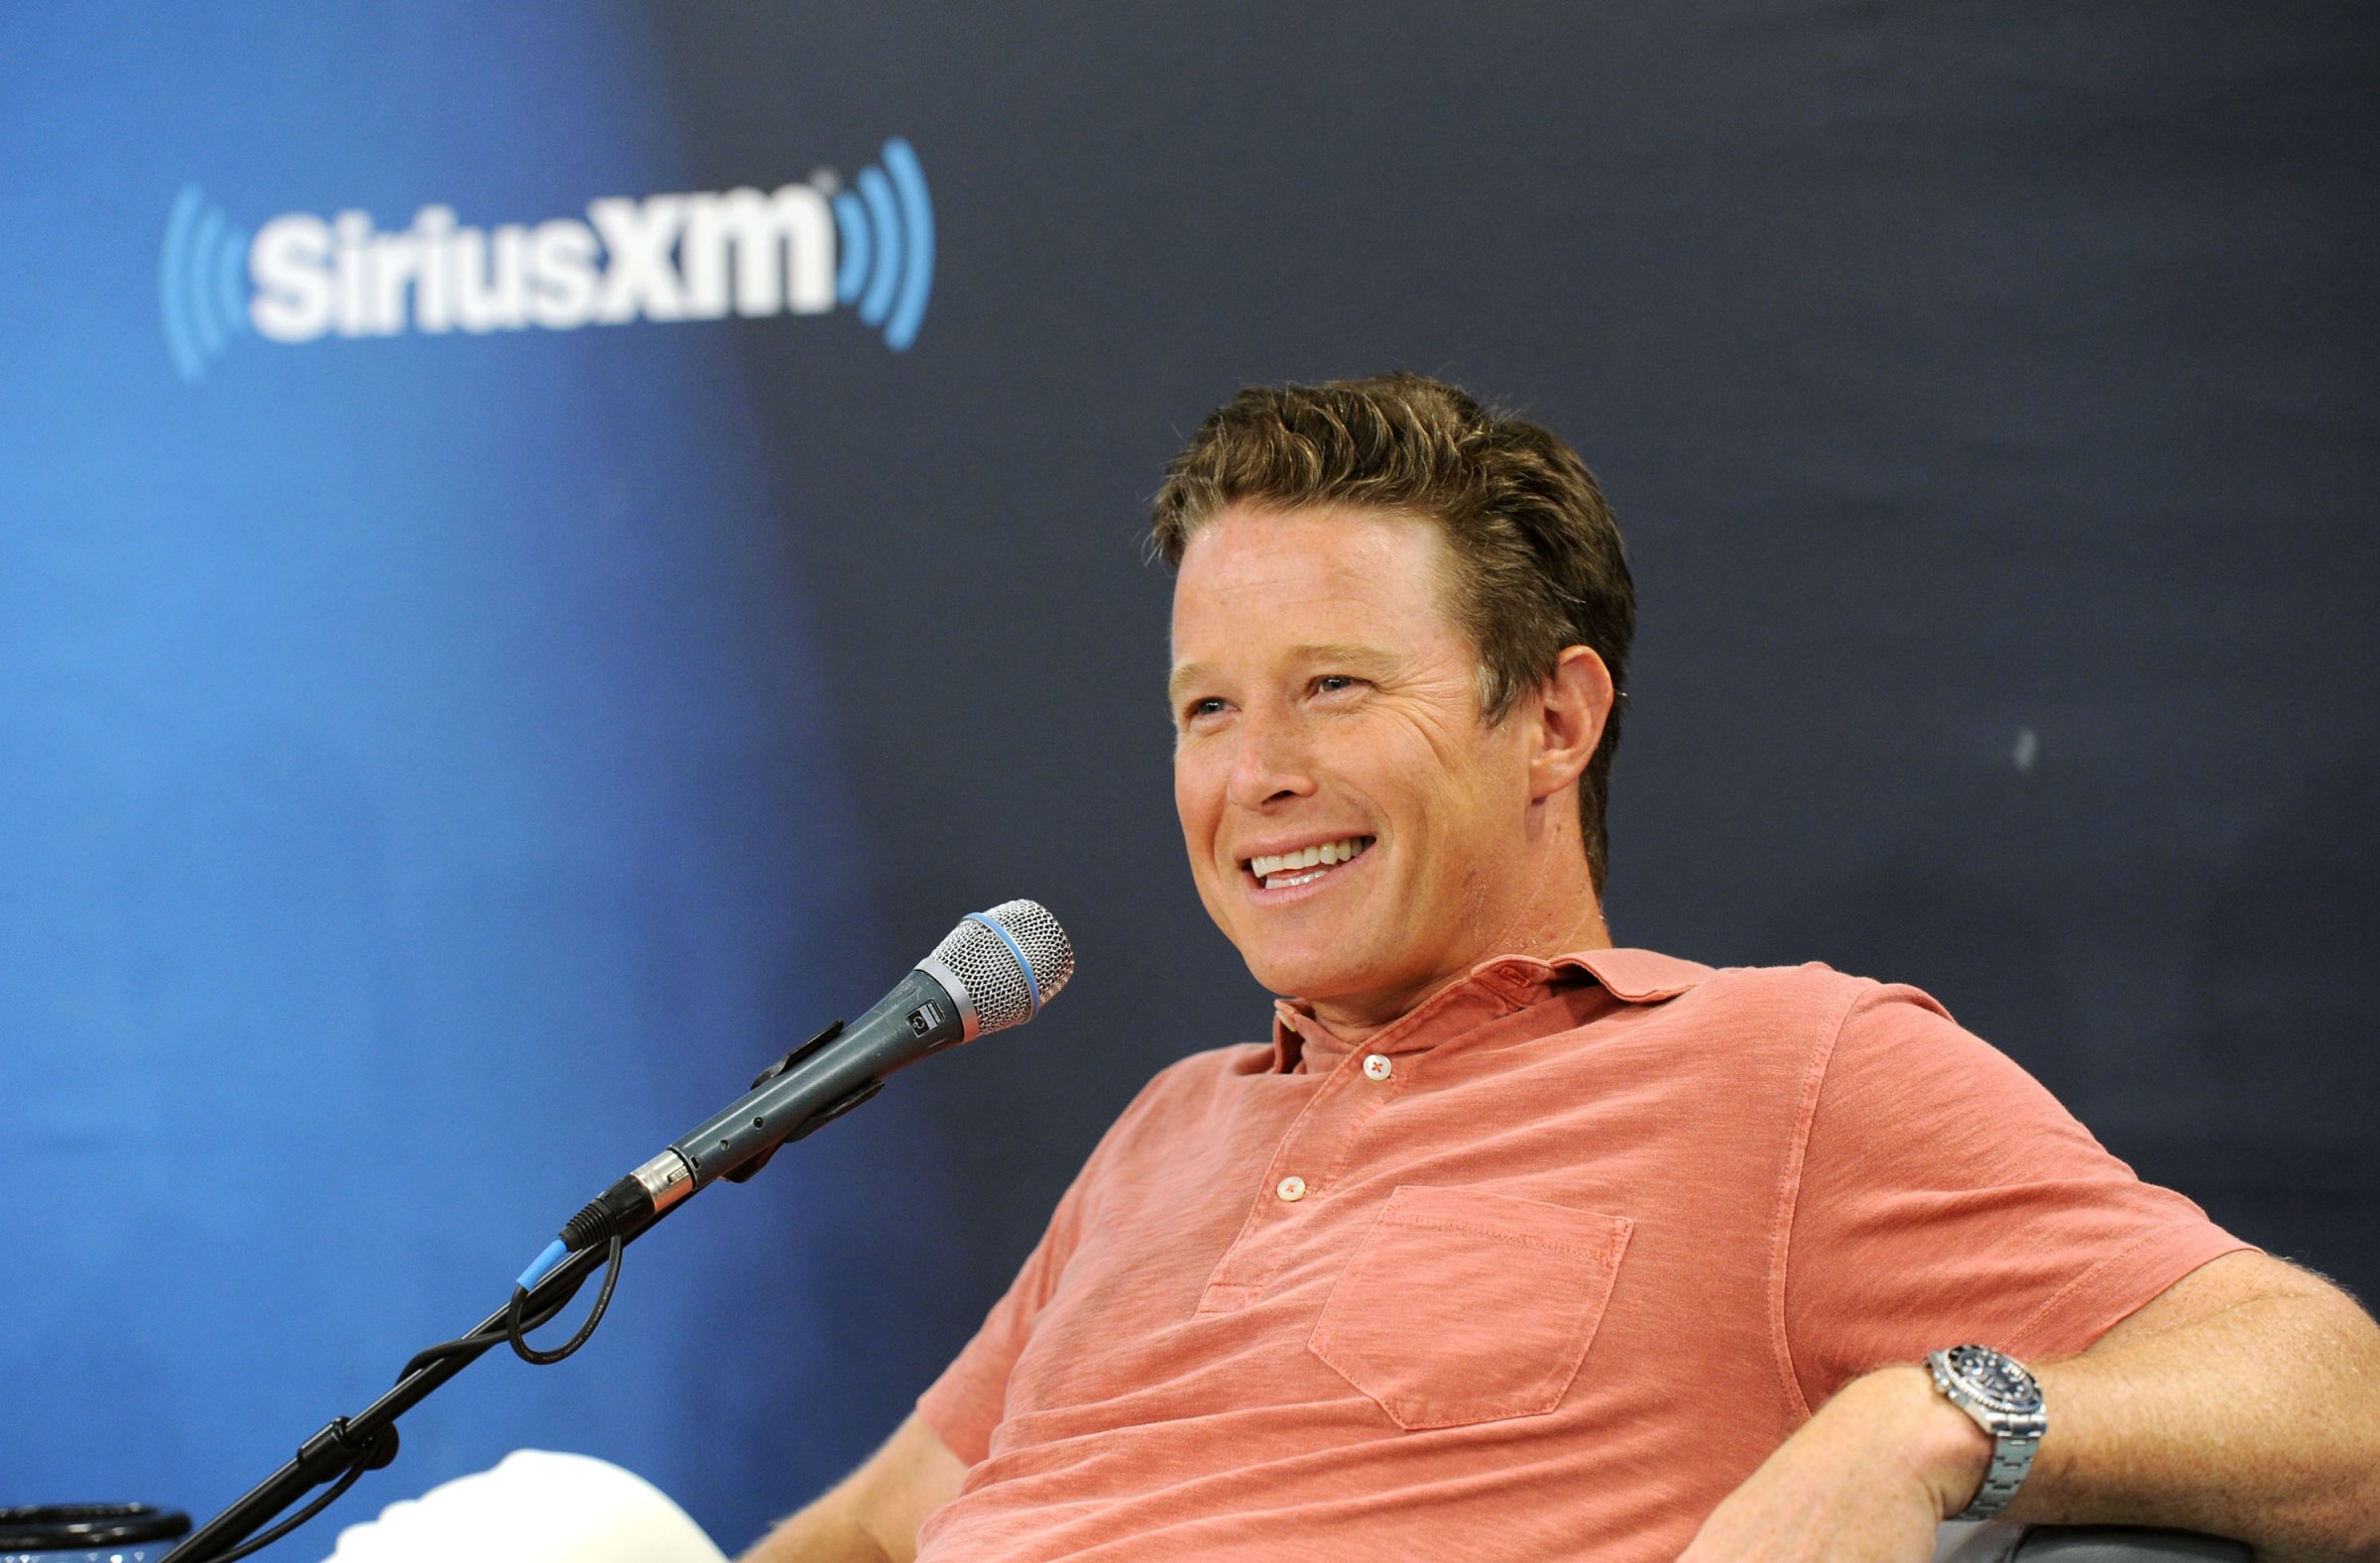 NBC News' Billy Bush in conversation with Jeff Rossen for SiriusXM's TODAY Show Radio at SiriusXM Studios on August 22, 2016 in New York City.